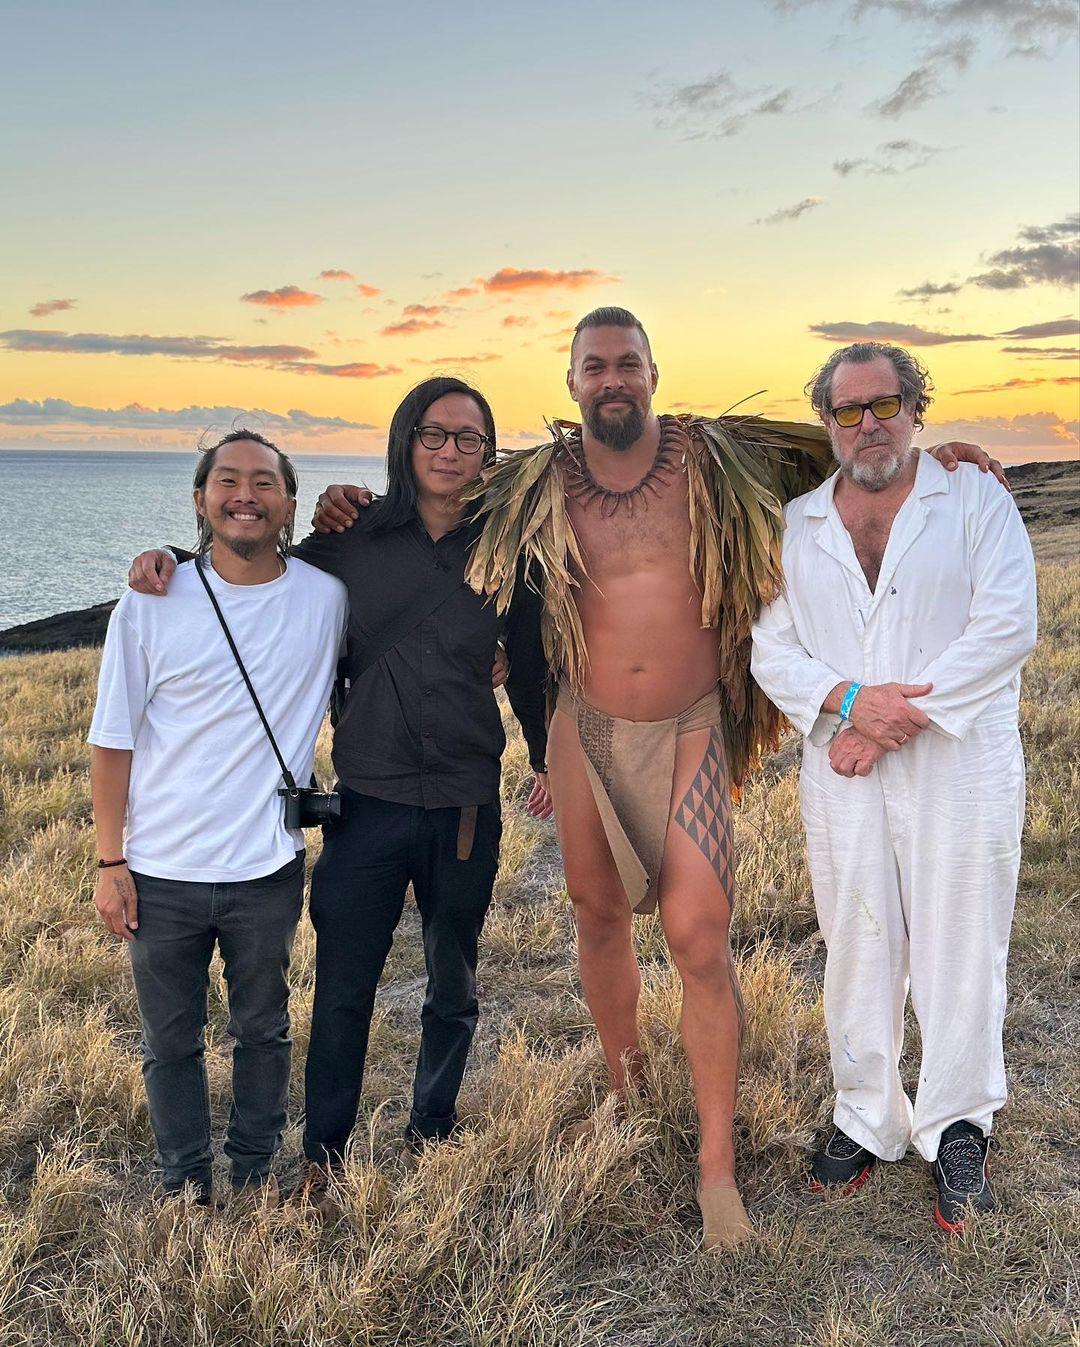 Jason Momoa tries to stop trolls from spreading false information about Maui